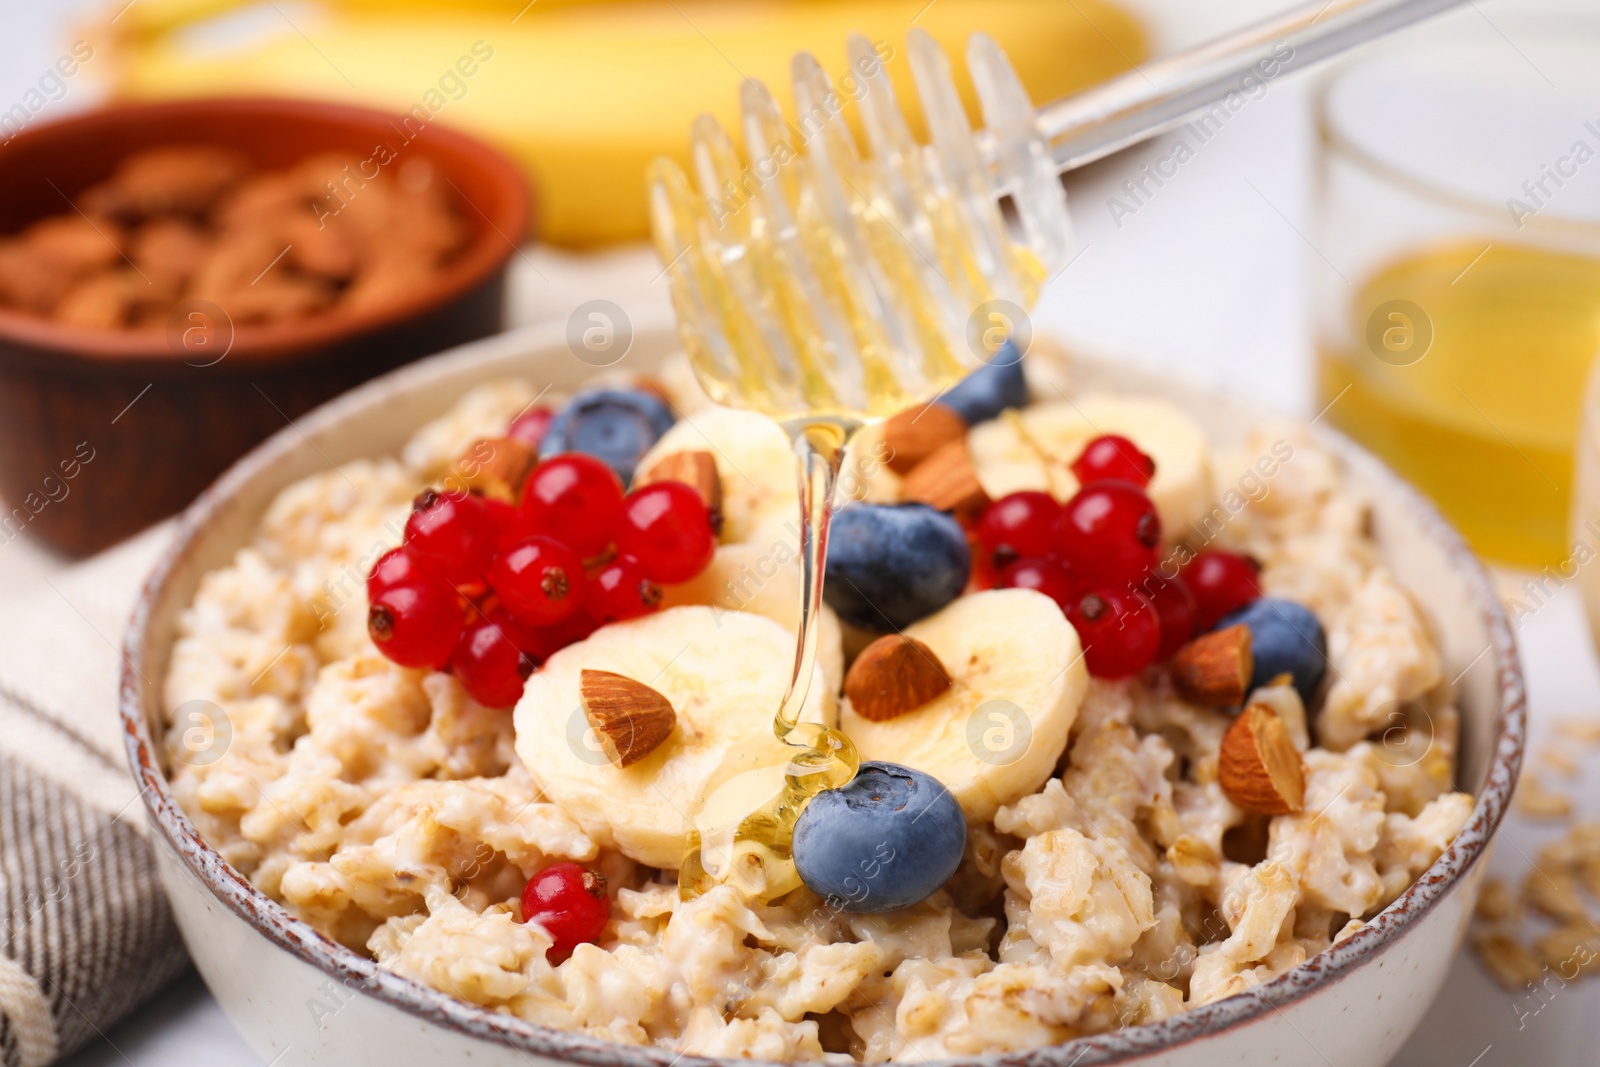 Photo of Honey pouring into bowl of oatmeal with berries, almonds and banana slices on table, closeup